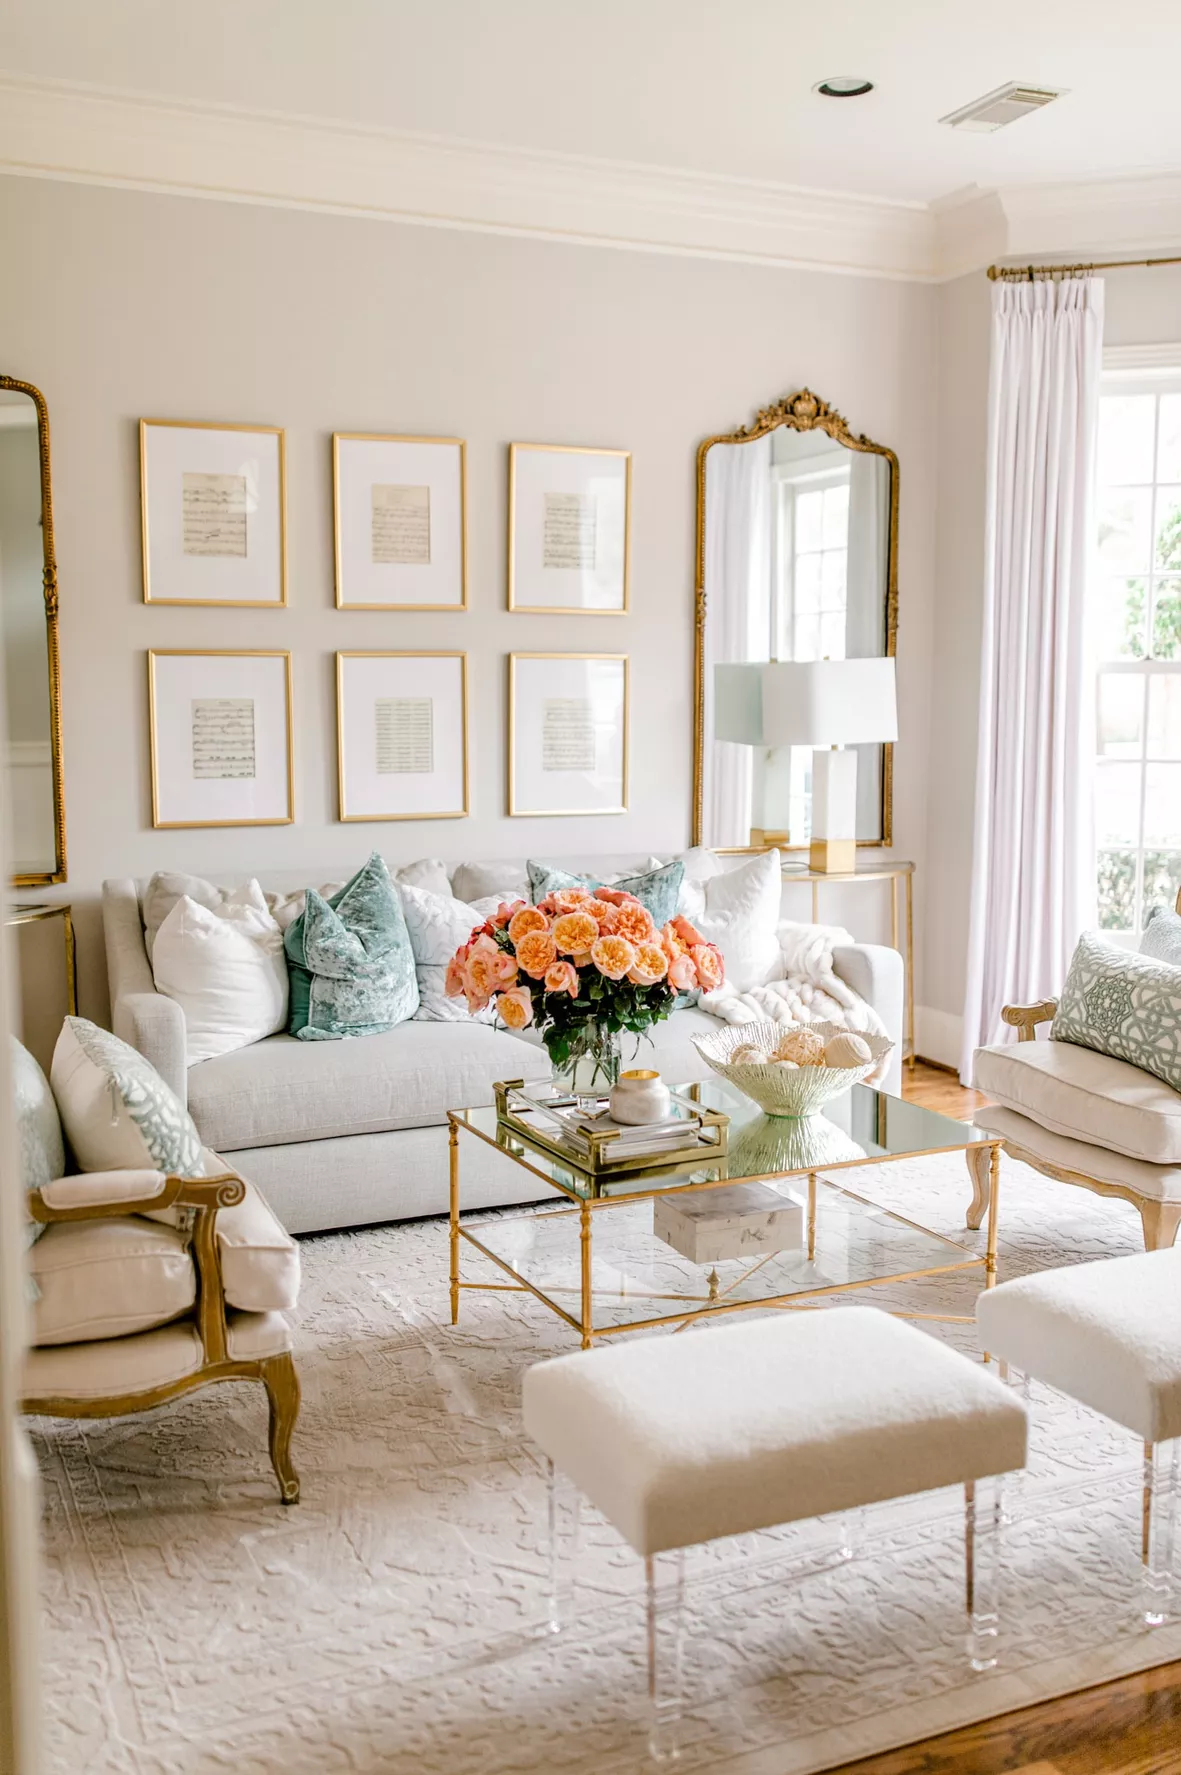 How to Decorate a Formal Living Room